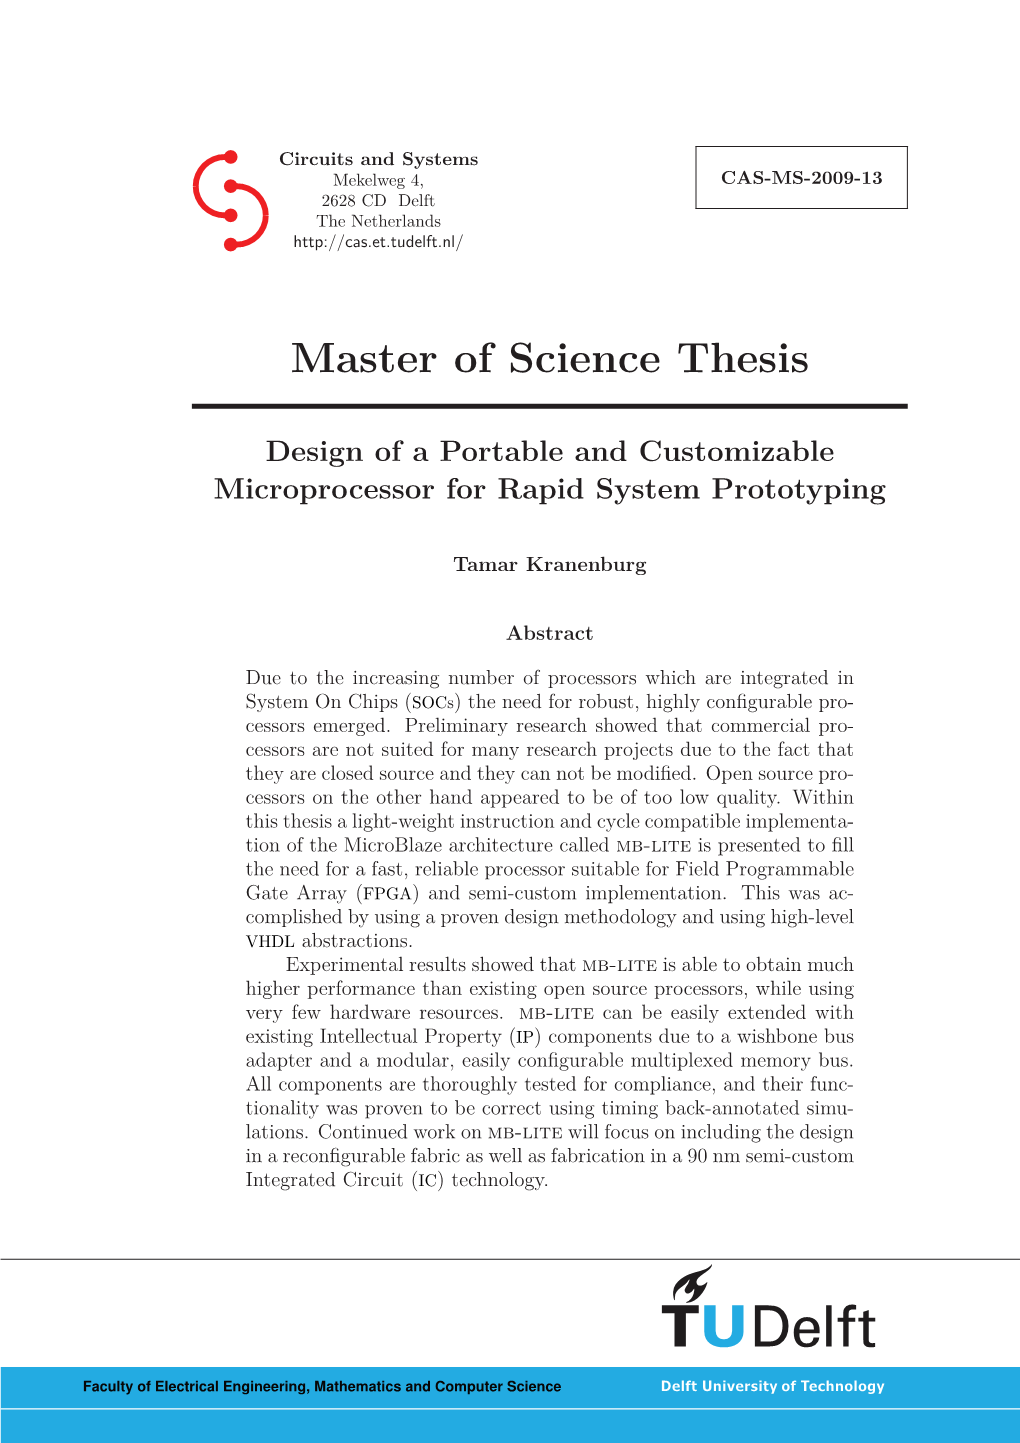 Master of Science Thesis